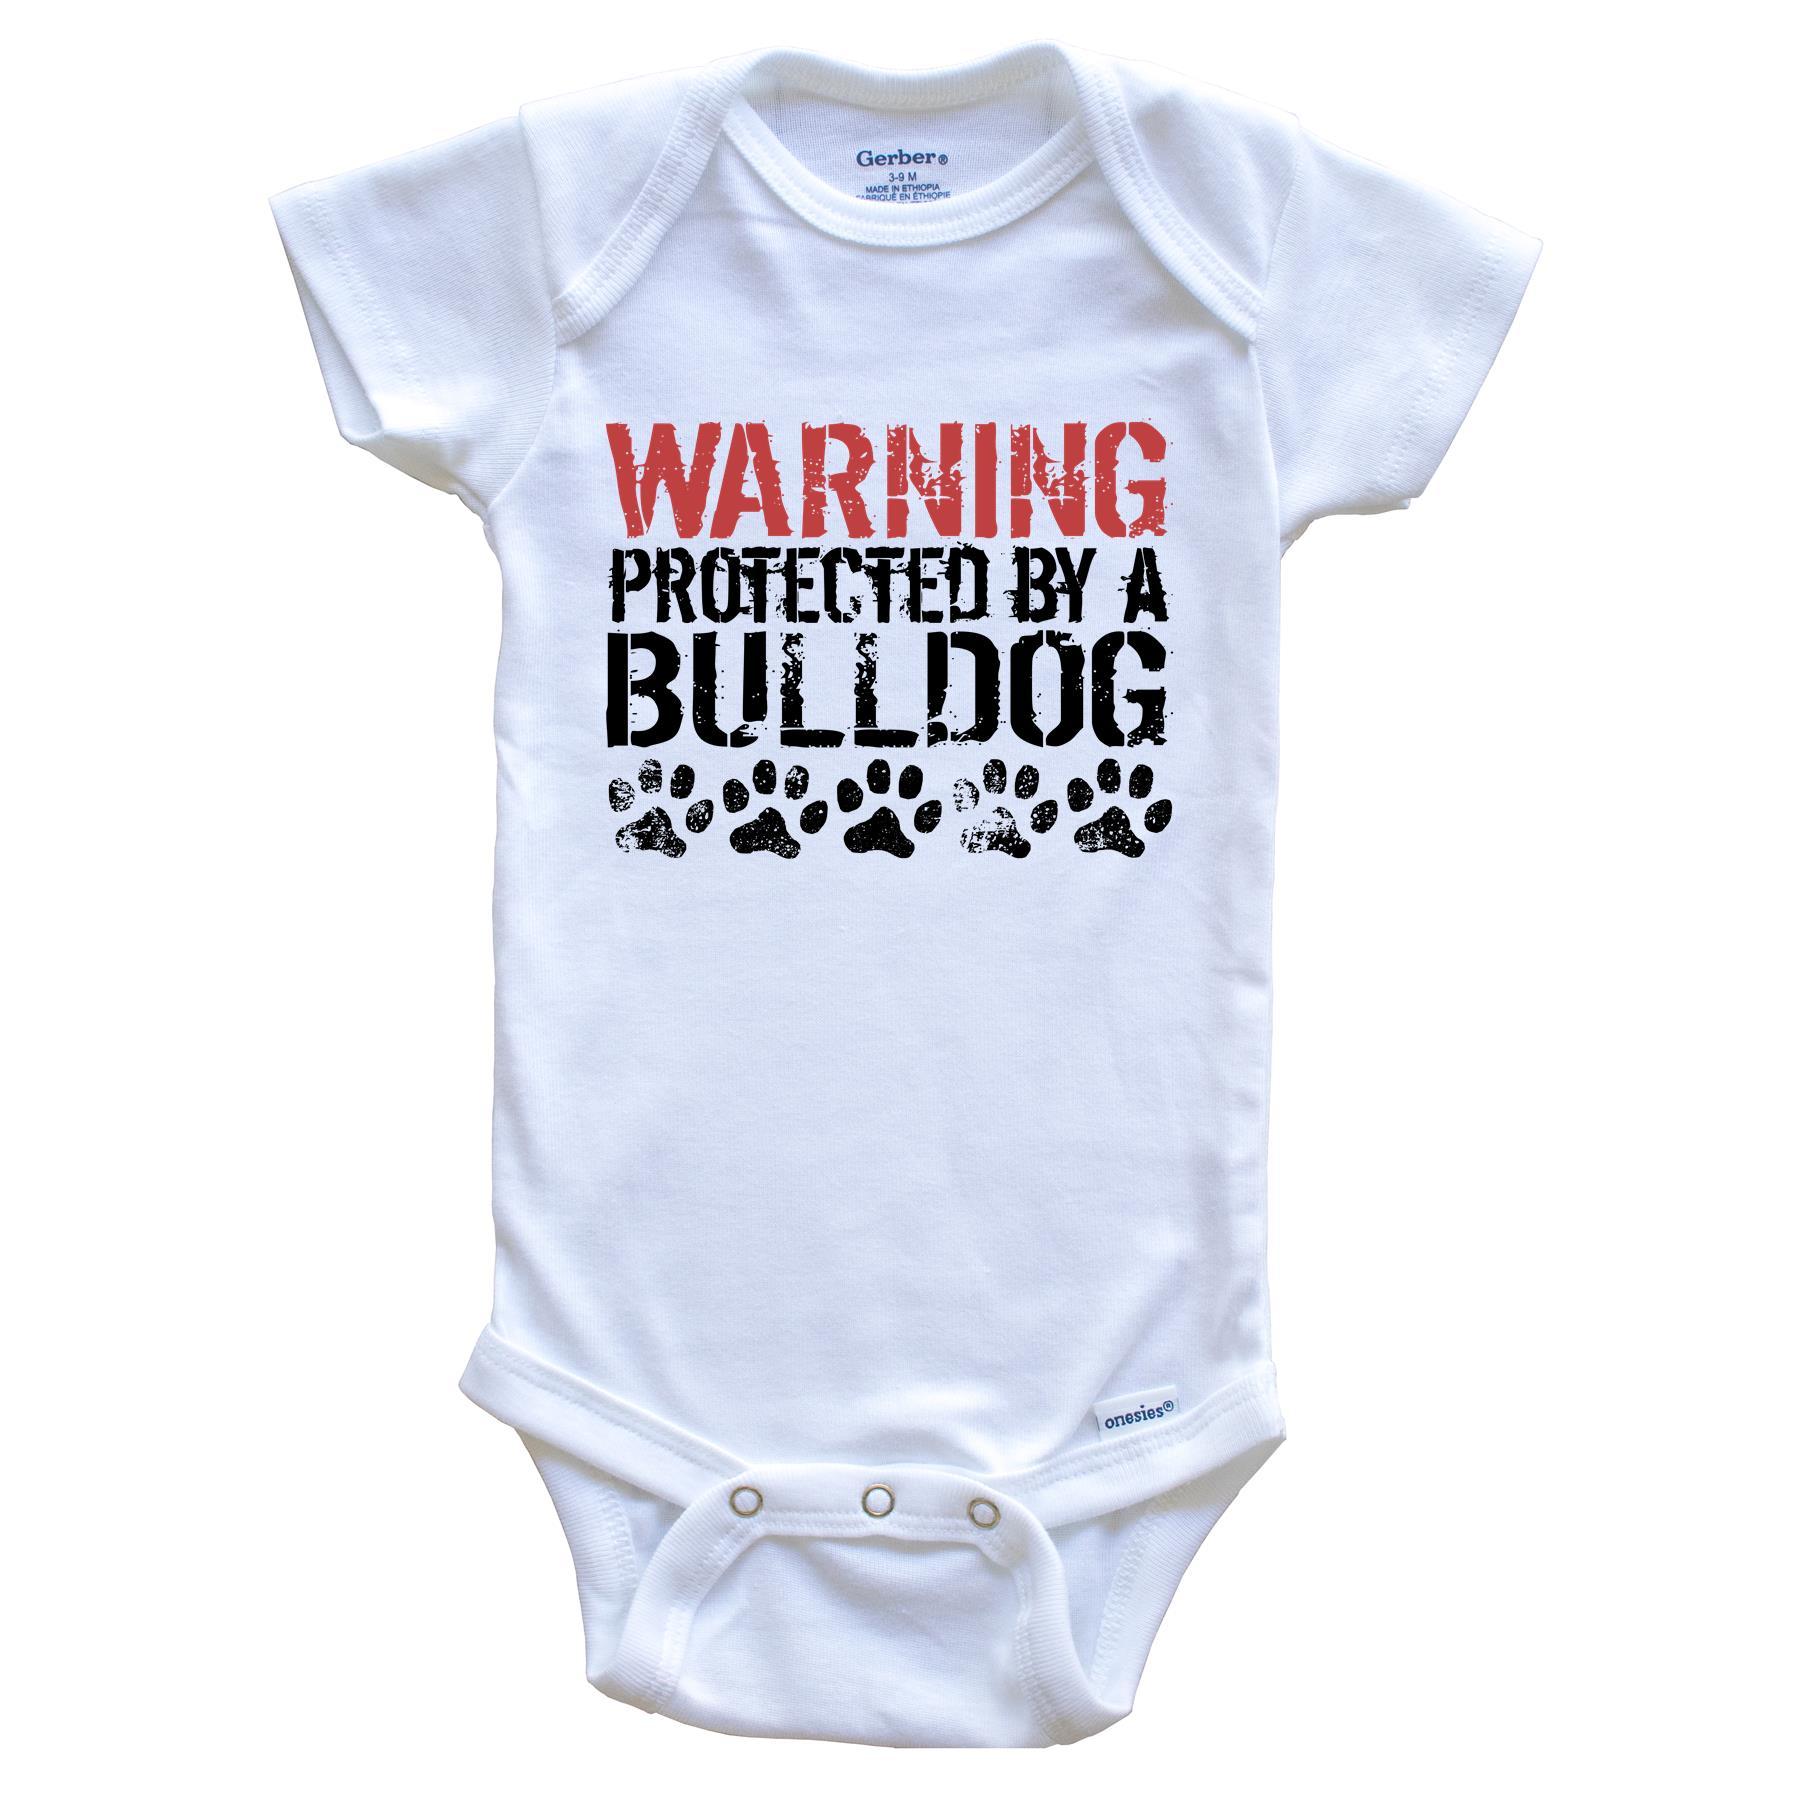 Warning Protected By A Bulldog Baby Onesie